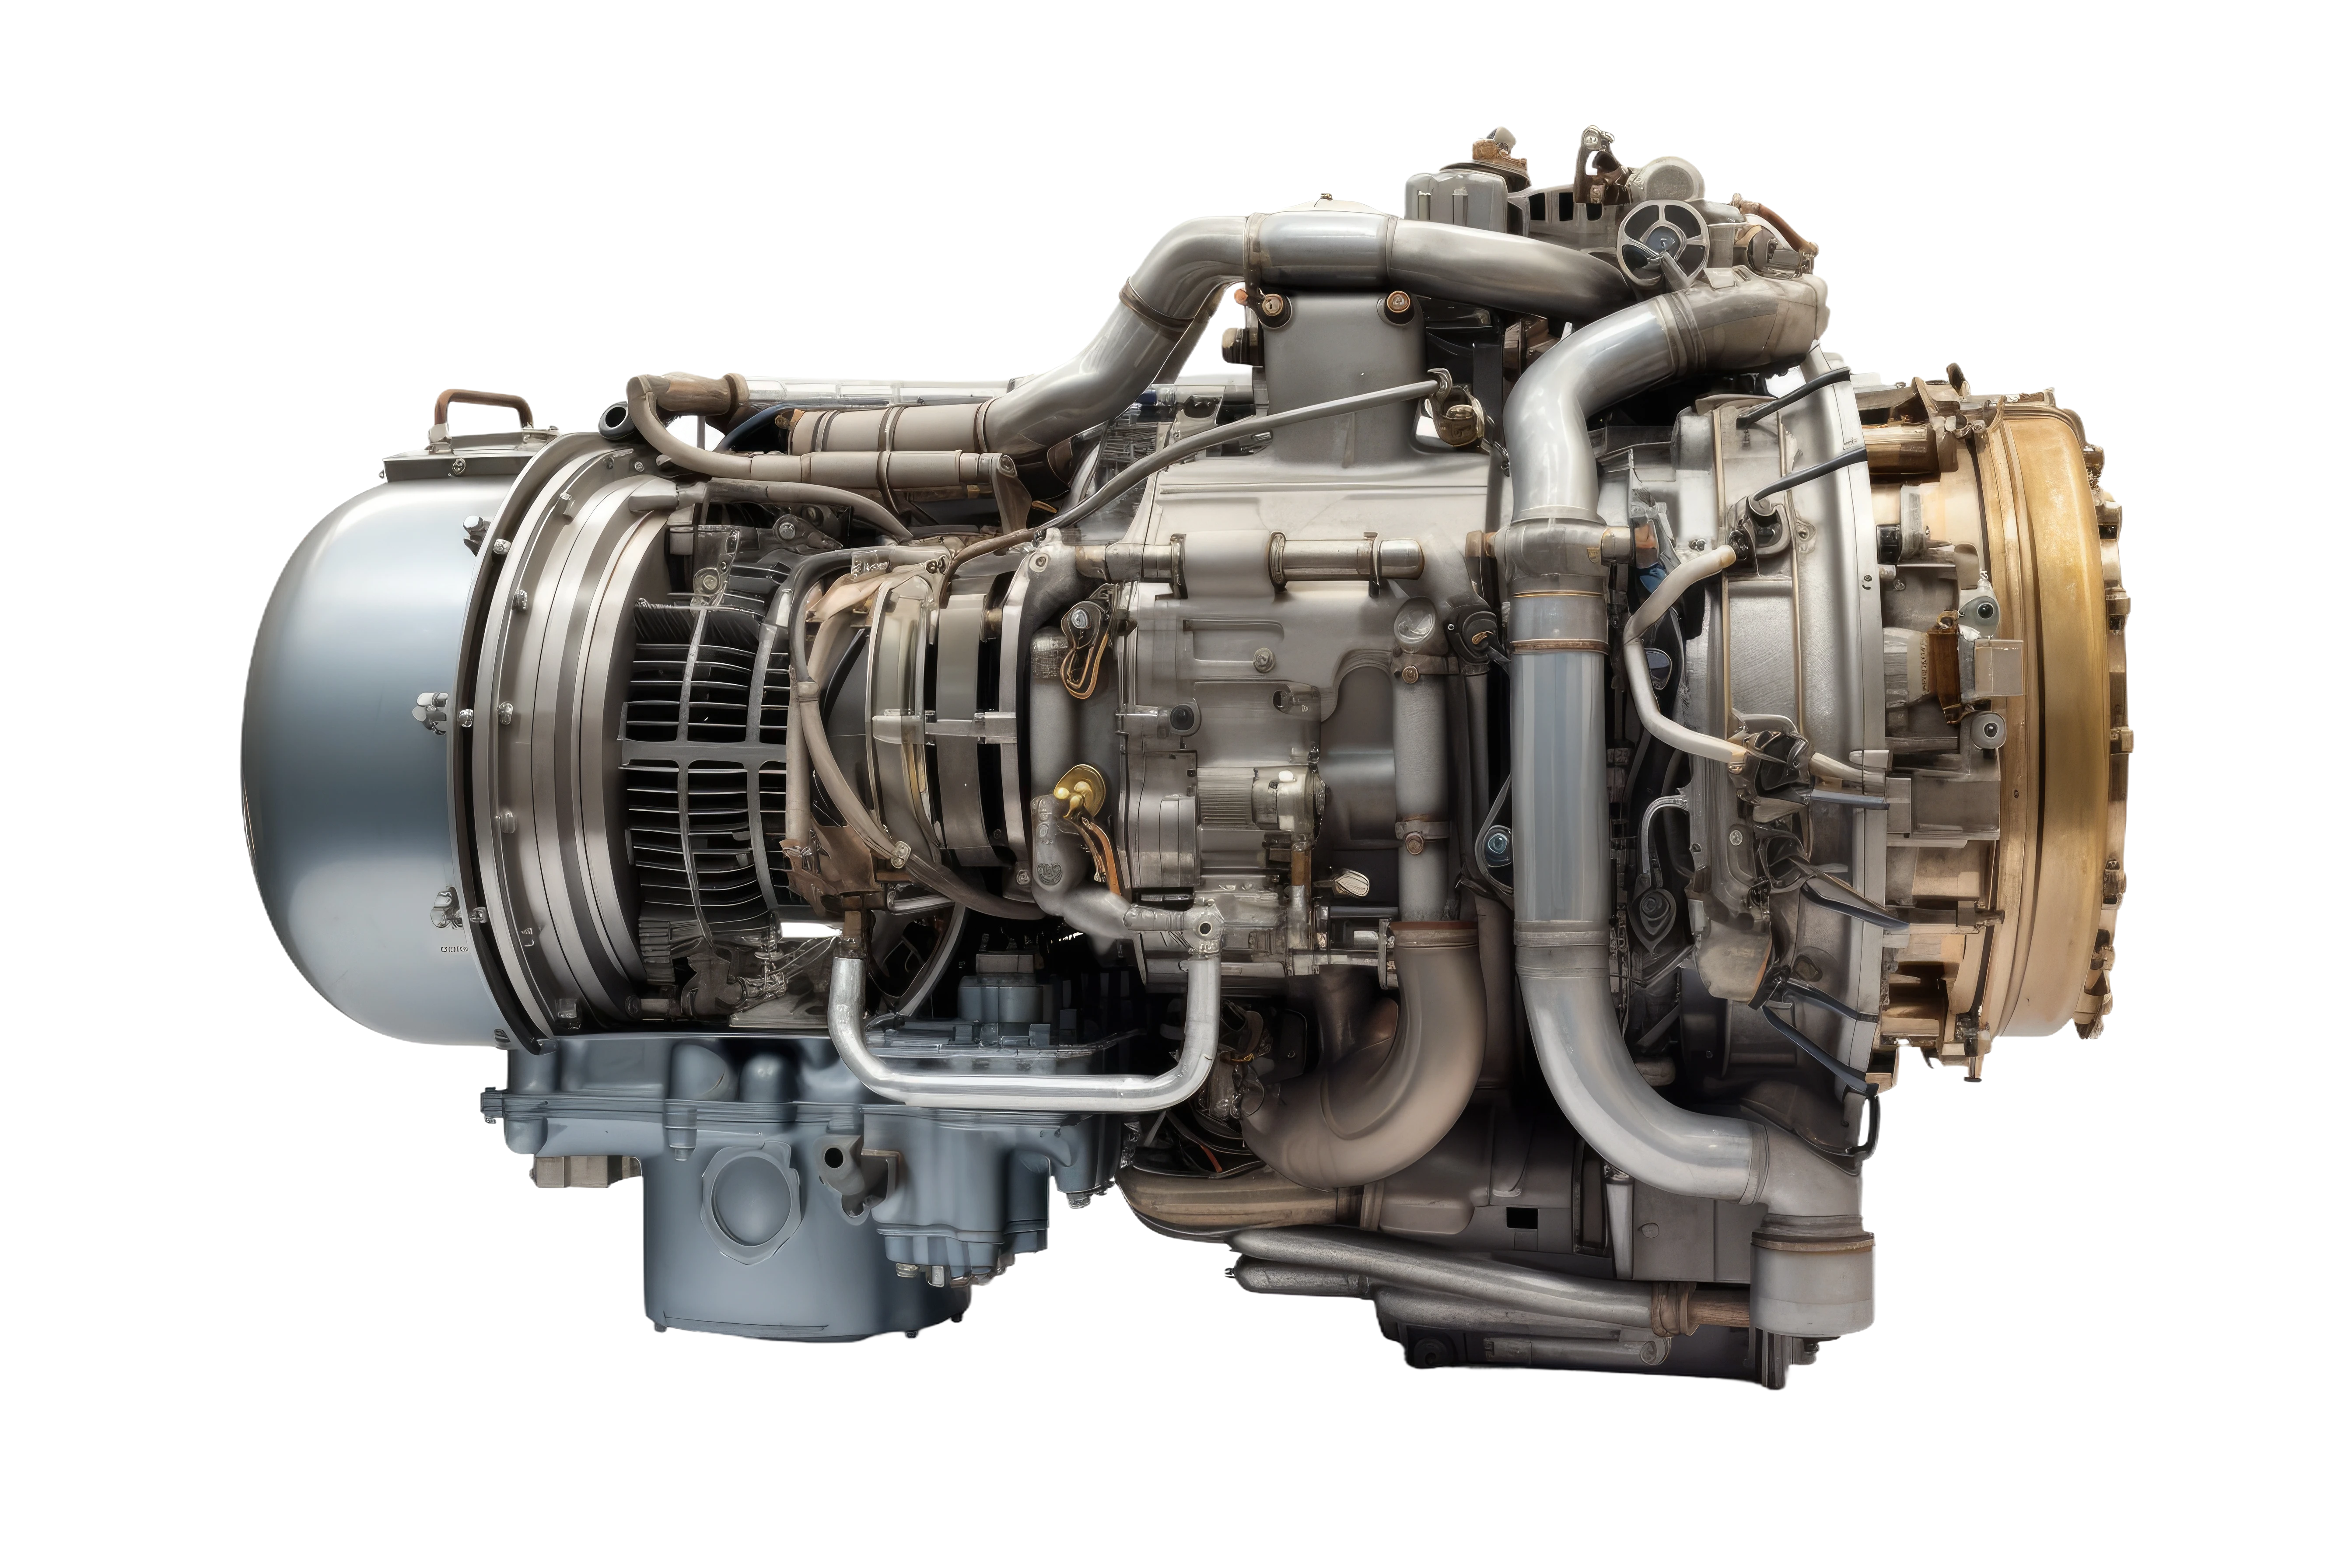 An optimally functioning fuel system is essential to your aircraft’s efficiency and safety